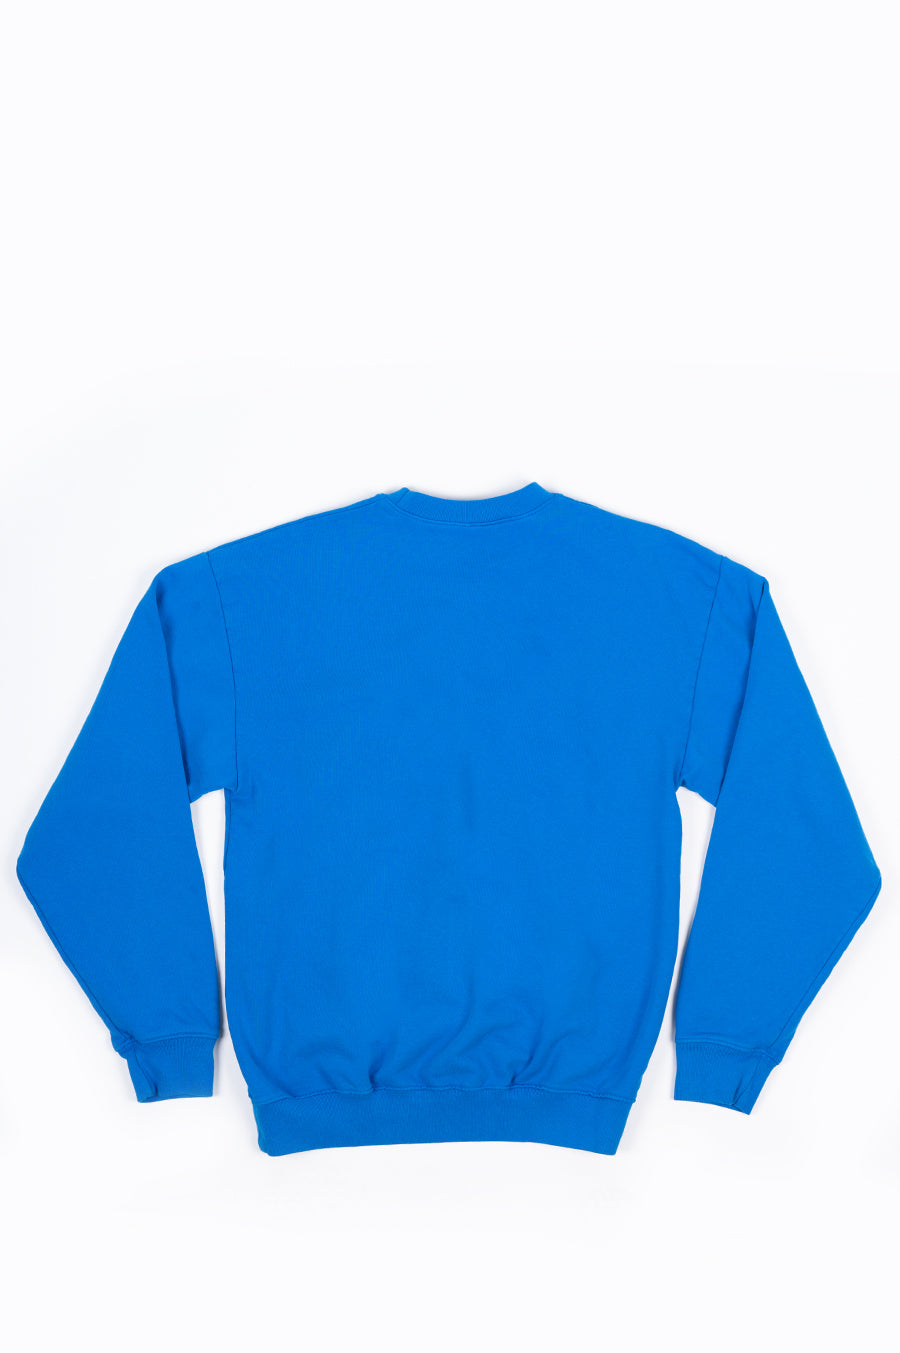 SPORTY AND RICH SRHWC CREWNECK PRIMARY BLUE